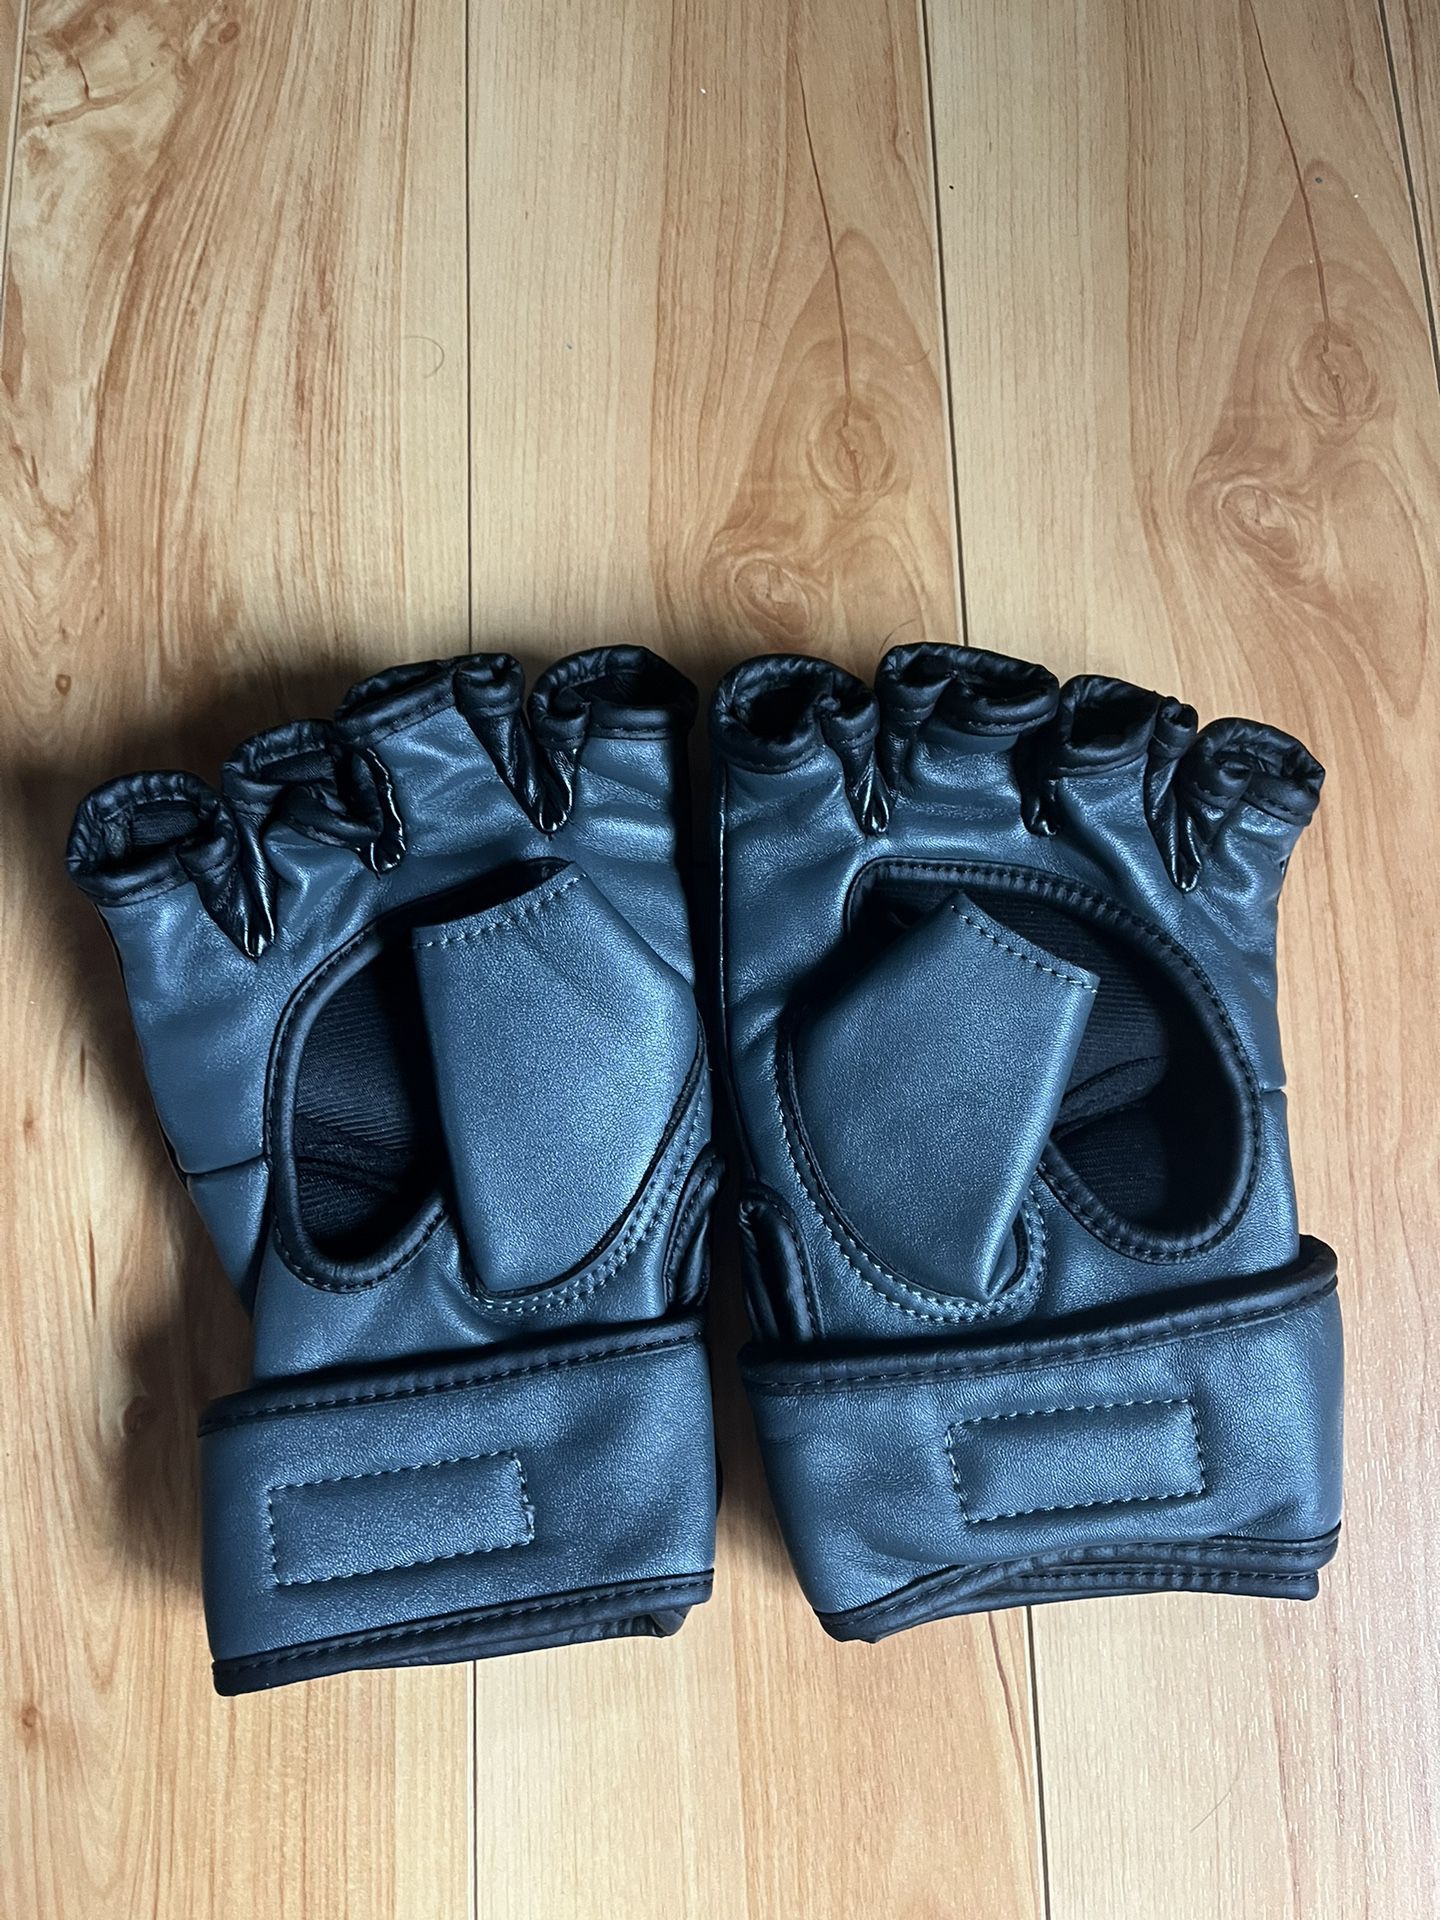 Boxing Gloves MMA UFC 